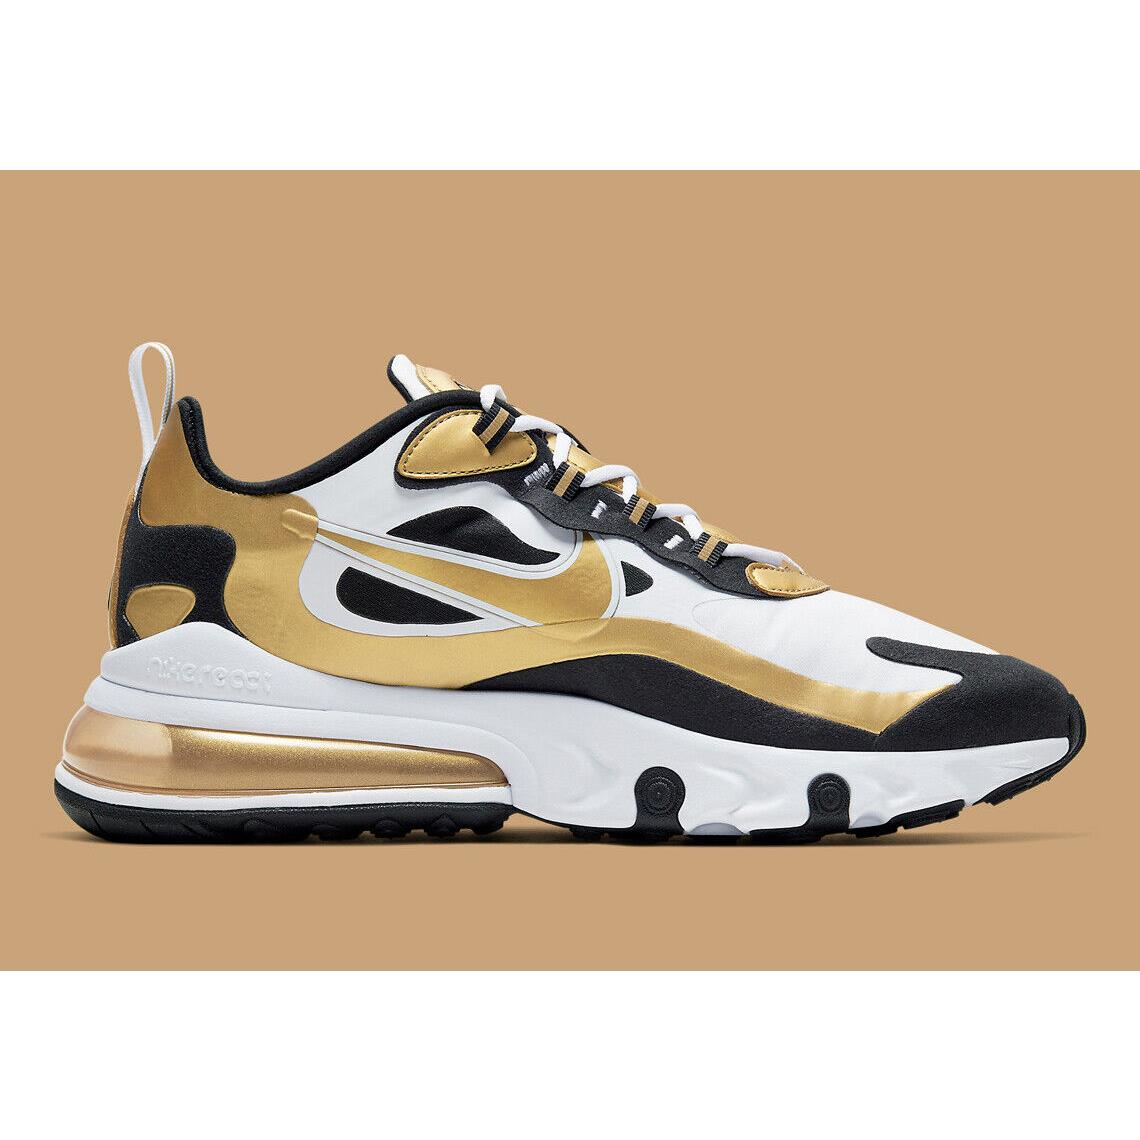 Men`s Nike Max 270 Running Shoes CW7298 100 Multi Sizes Wht/mgold/ blk | 883212468888 - Nike shoes Air Max React - White/Metallic Gold/Black White/Metallic Gold/Black Manufacturer | SporTipTop